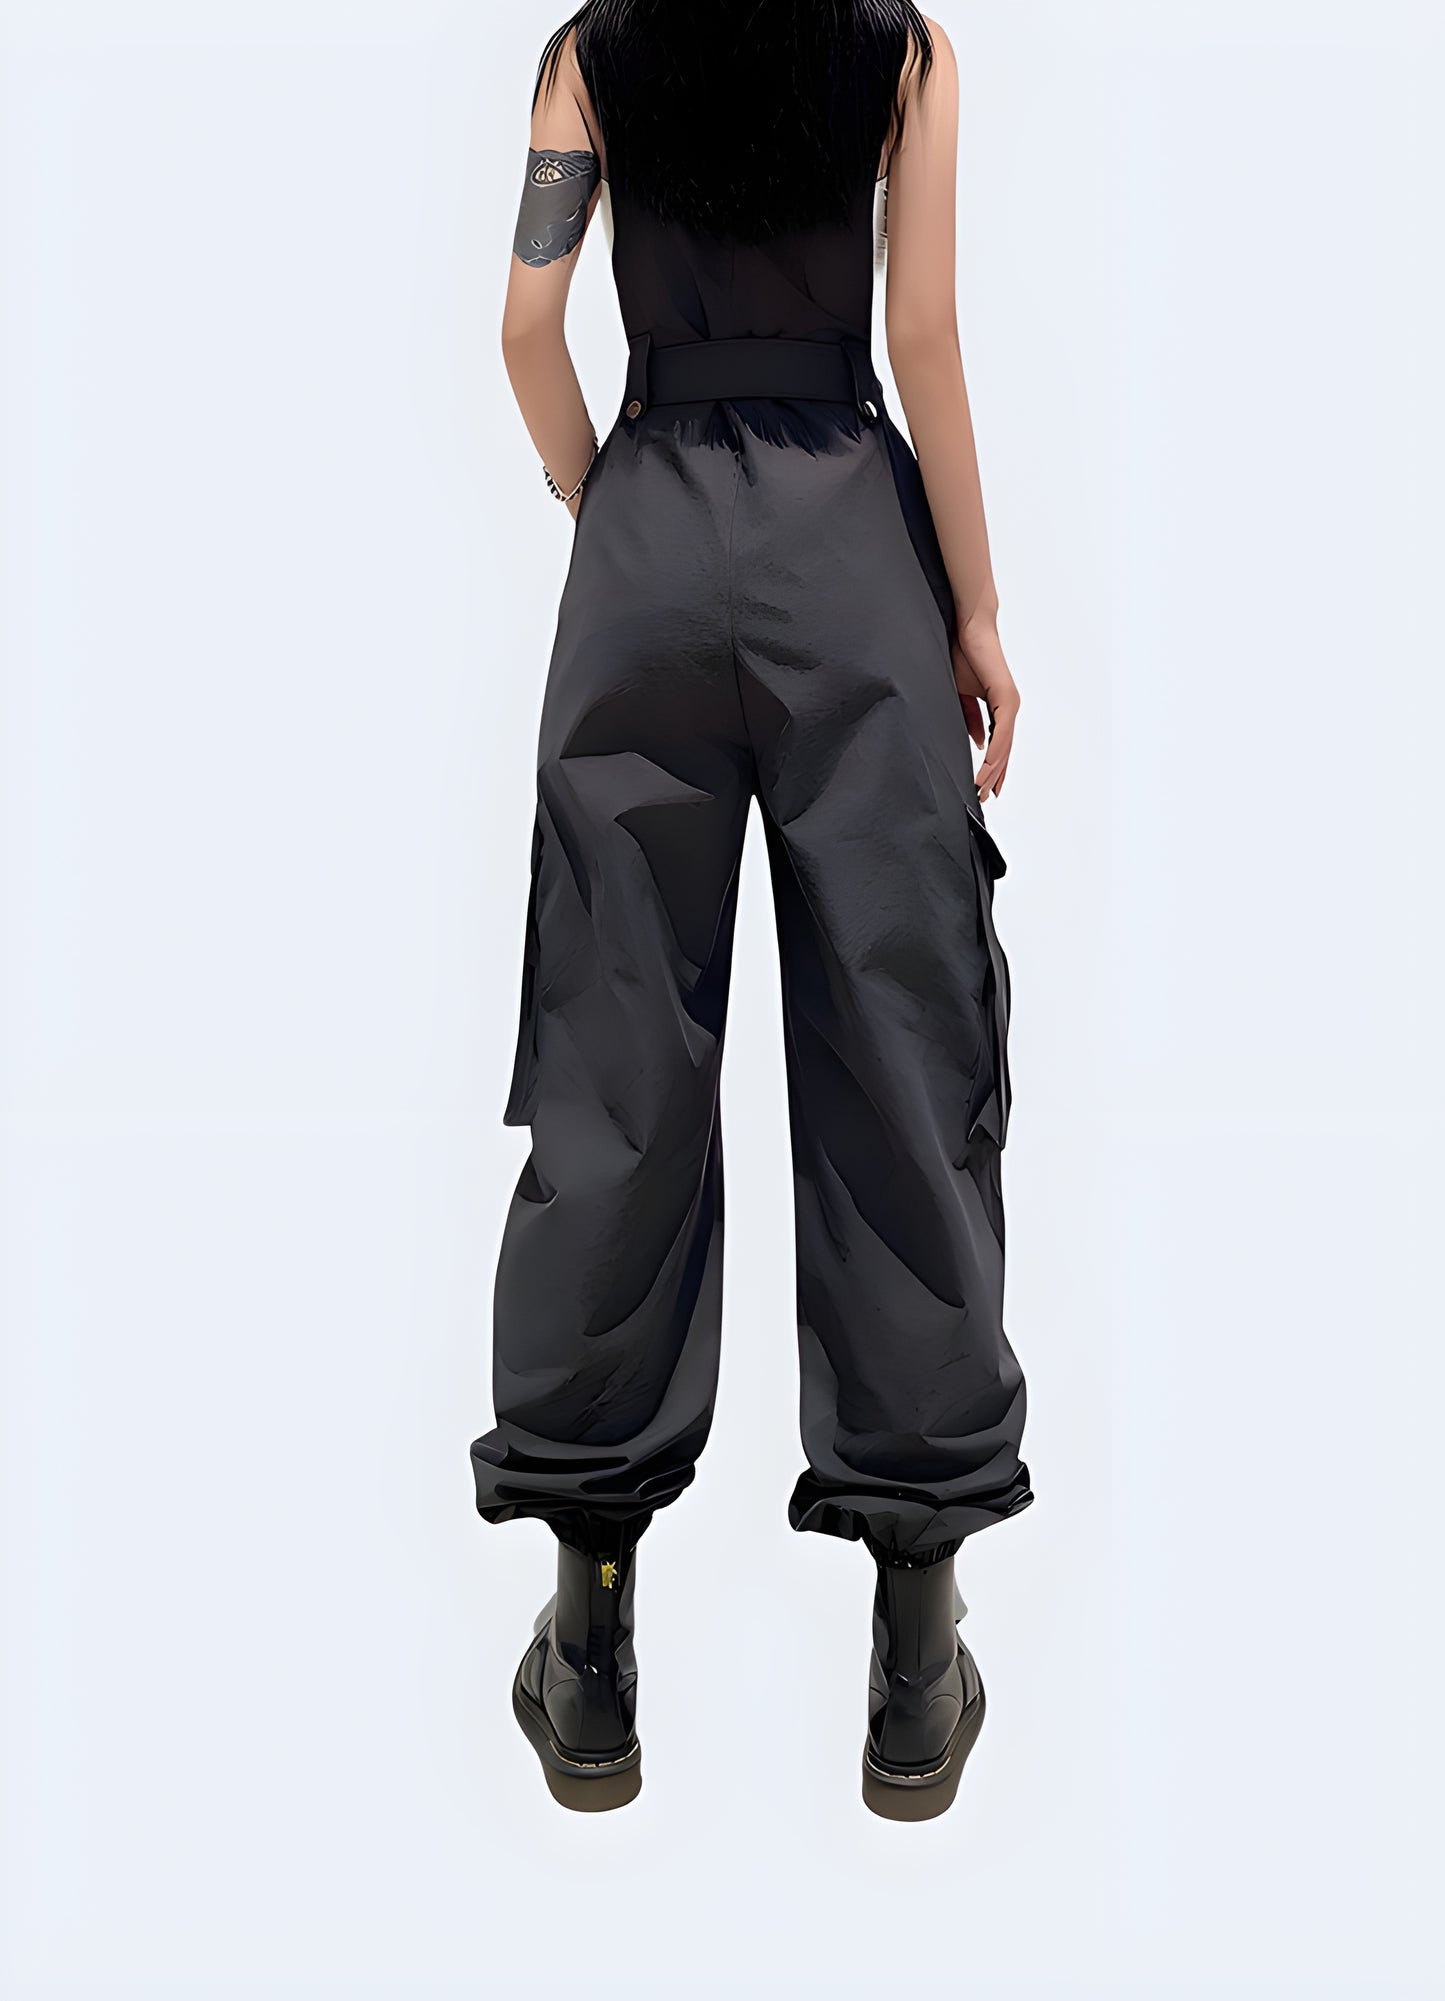 This female techwear piece embodies functionality merged with unparalleled style.